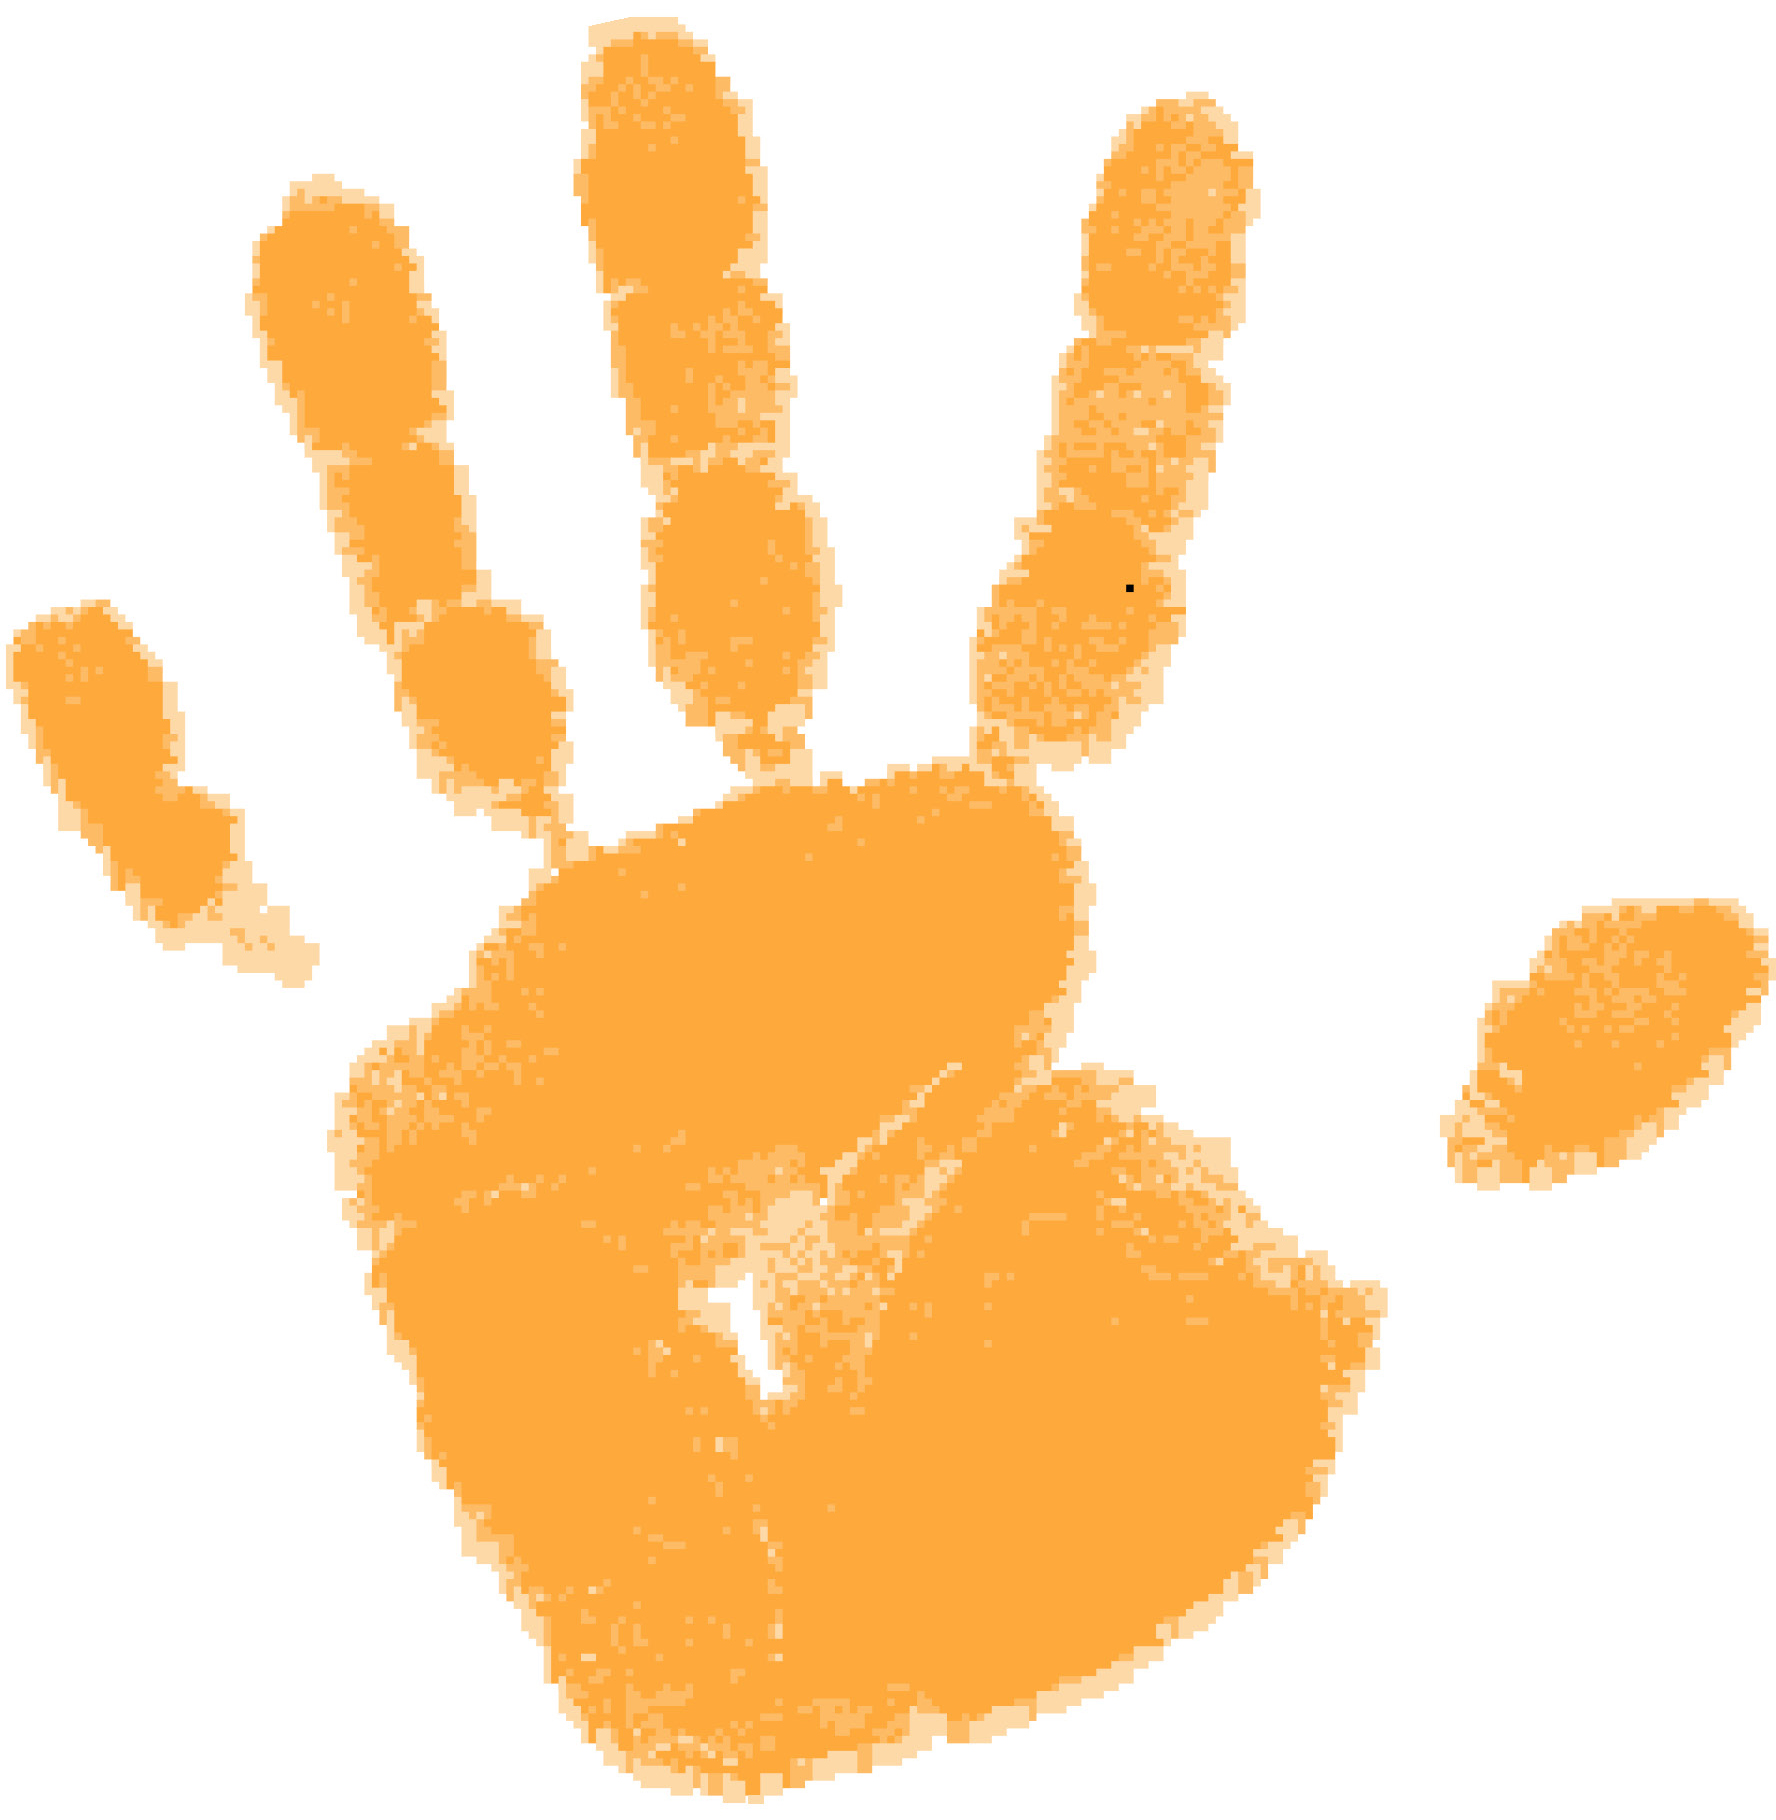 16 Handprint Image Free Cliparts That You Can Download To You Computer